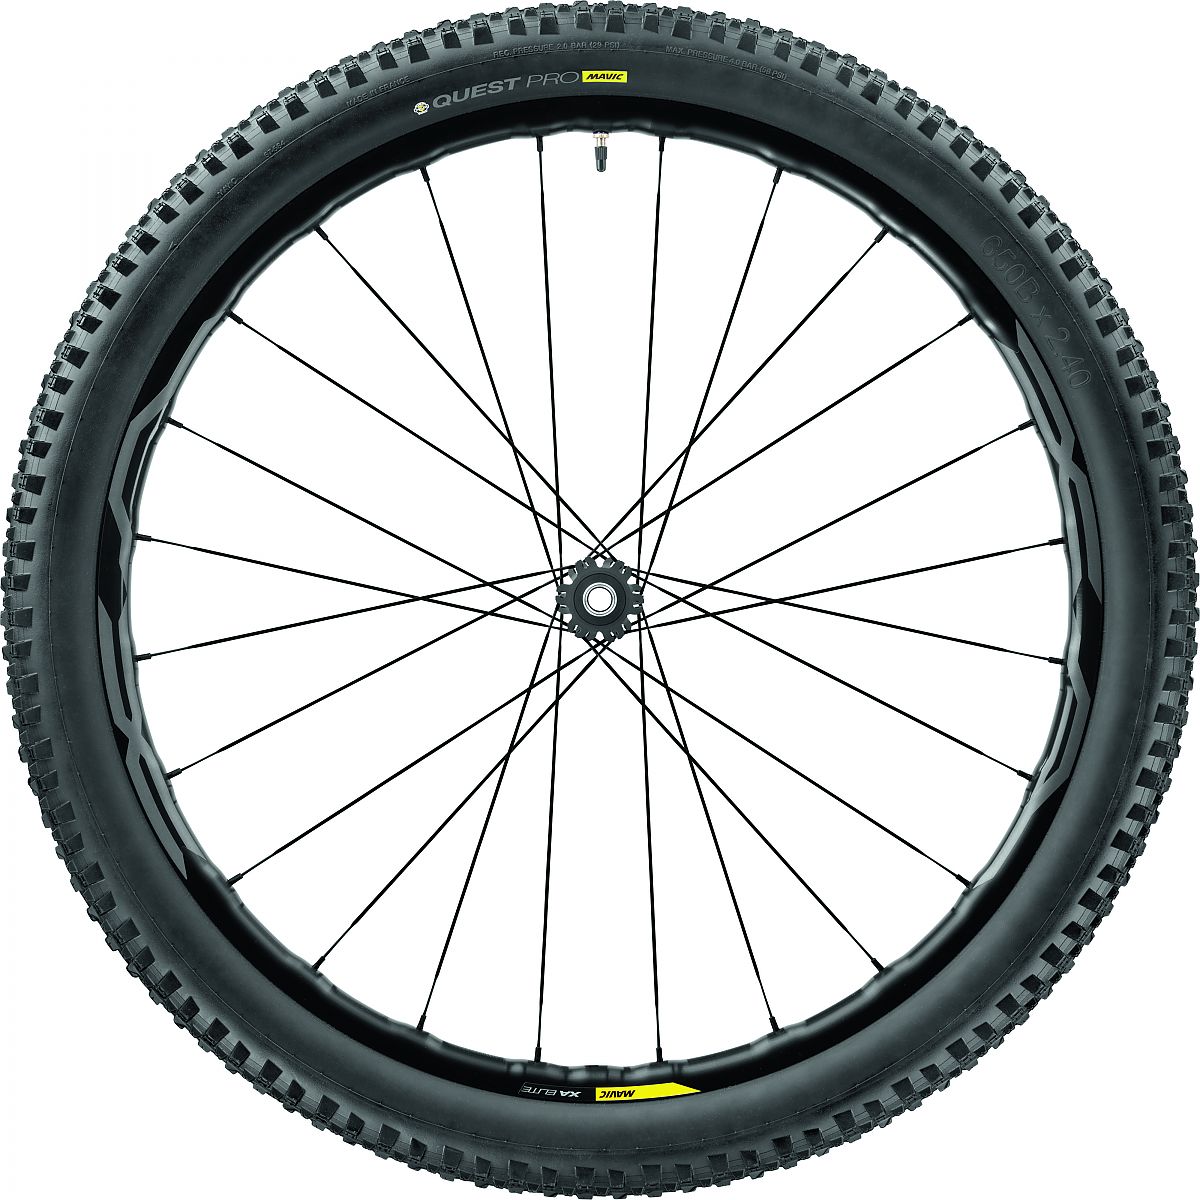 Mavic announces its first carbon mountain bike wheels | Bicycle